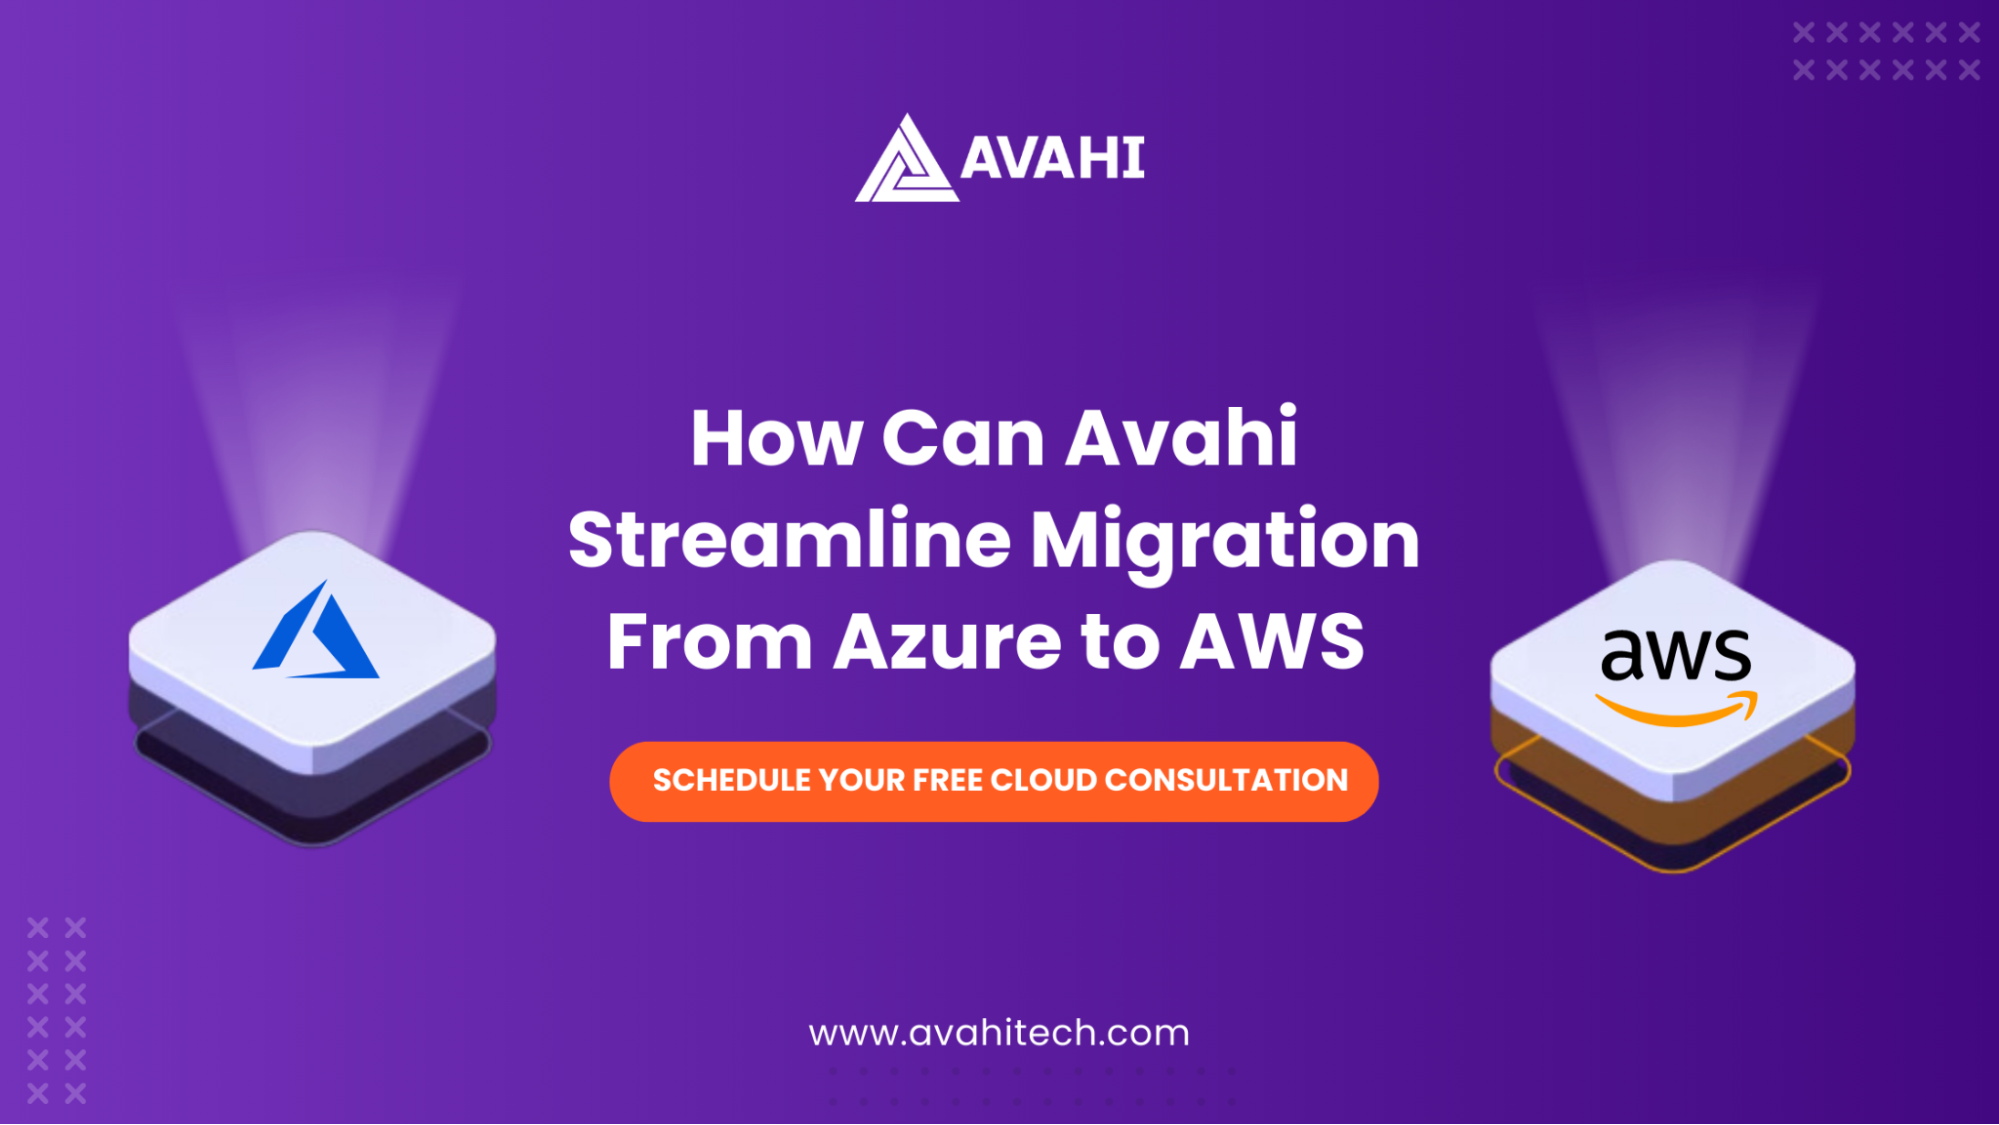 How can Avahi streamline migration from Azure to AWS